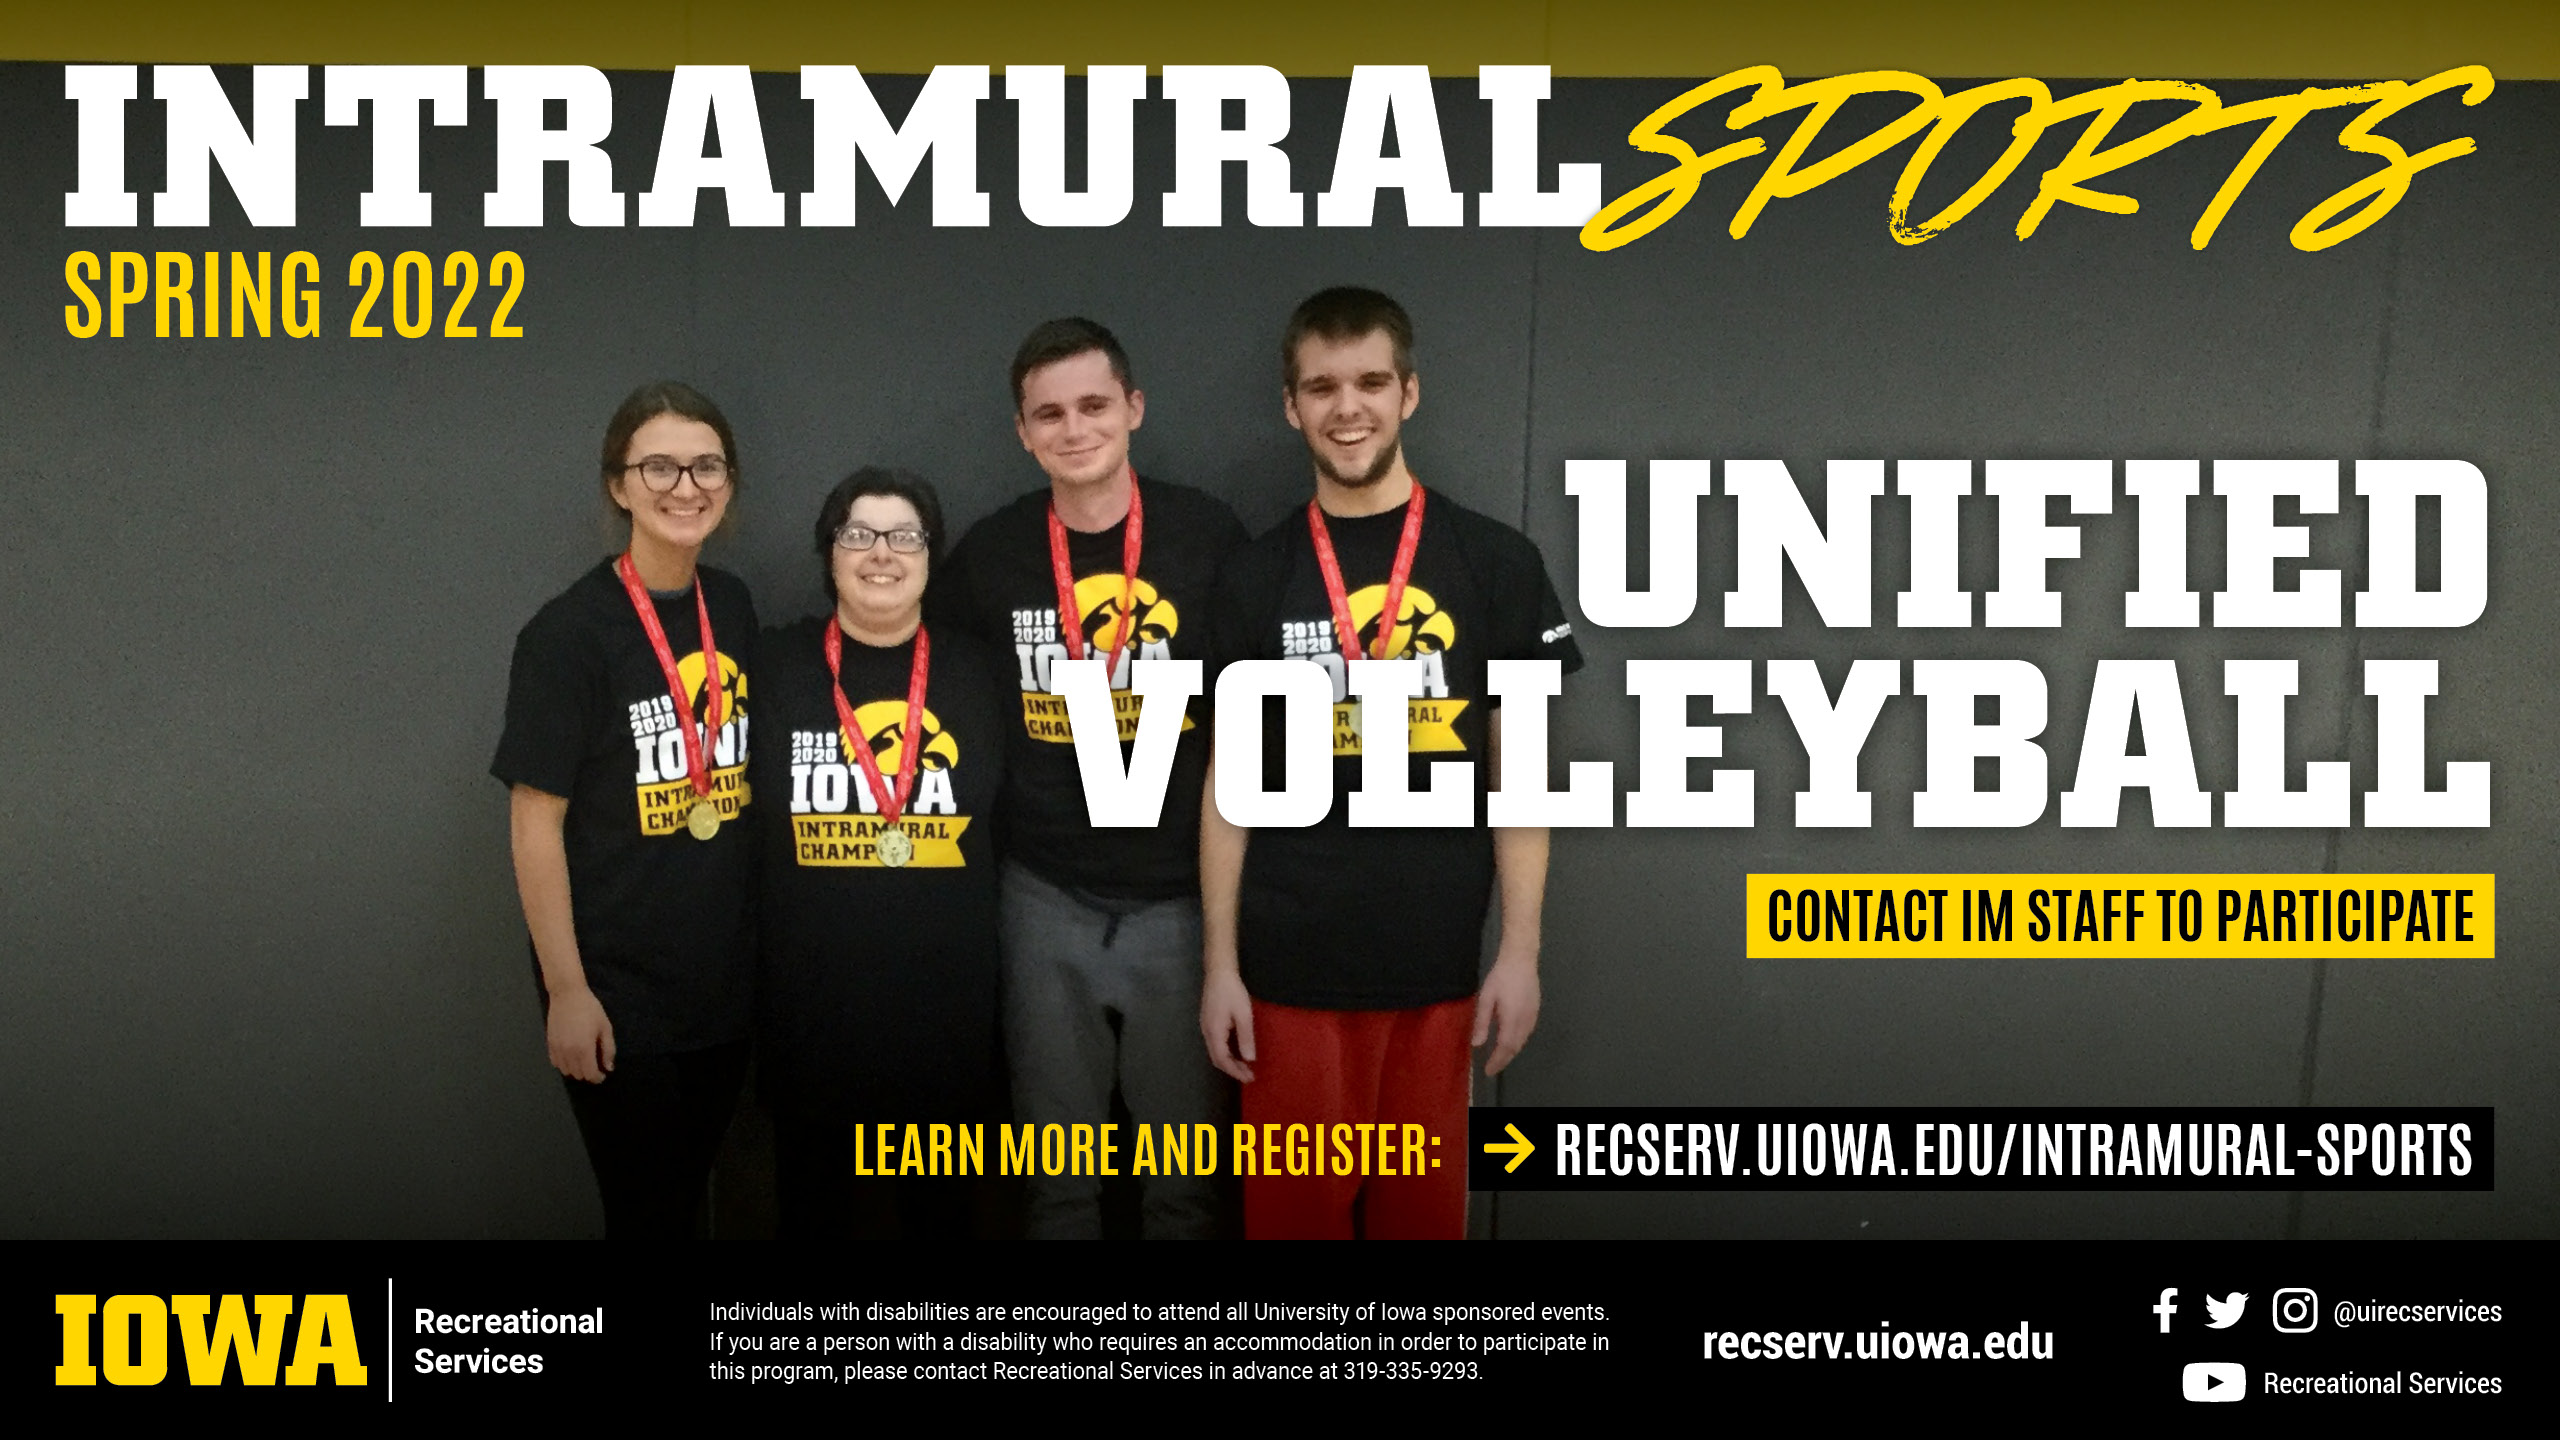 Intramural Sports Spring 2022 Unified Volleyball Contact IM Staff to Participate  learn more and register at: recserv.uiowa.edu/intramural-sports